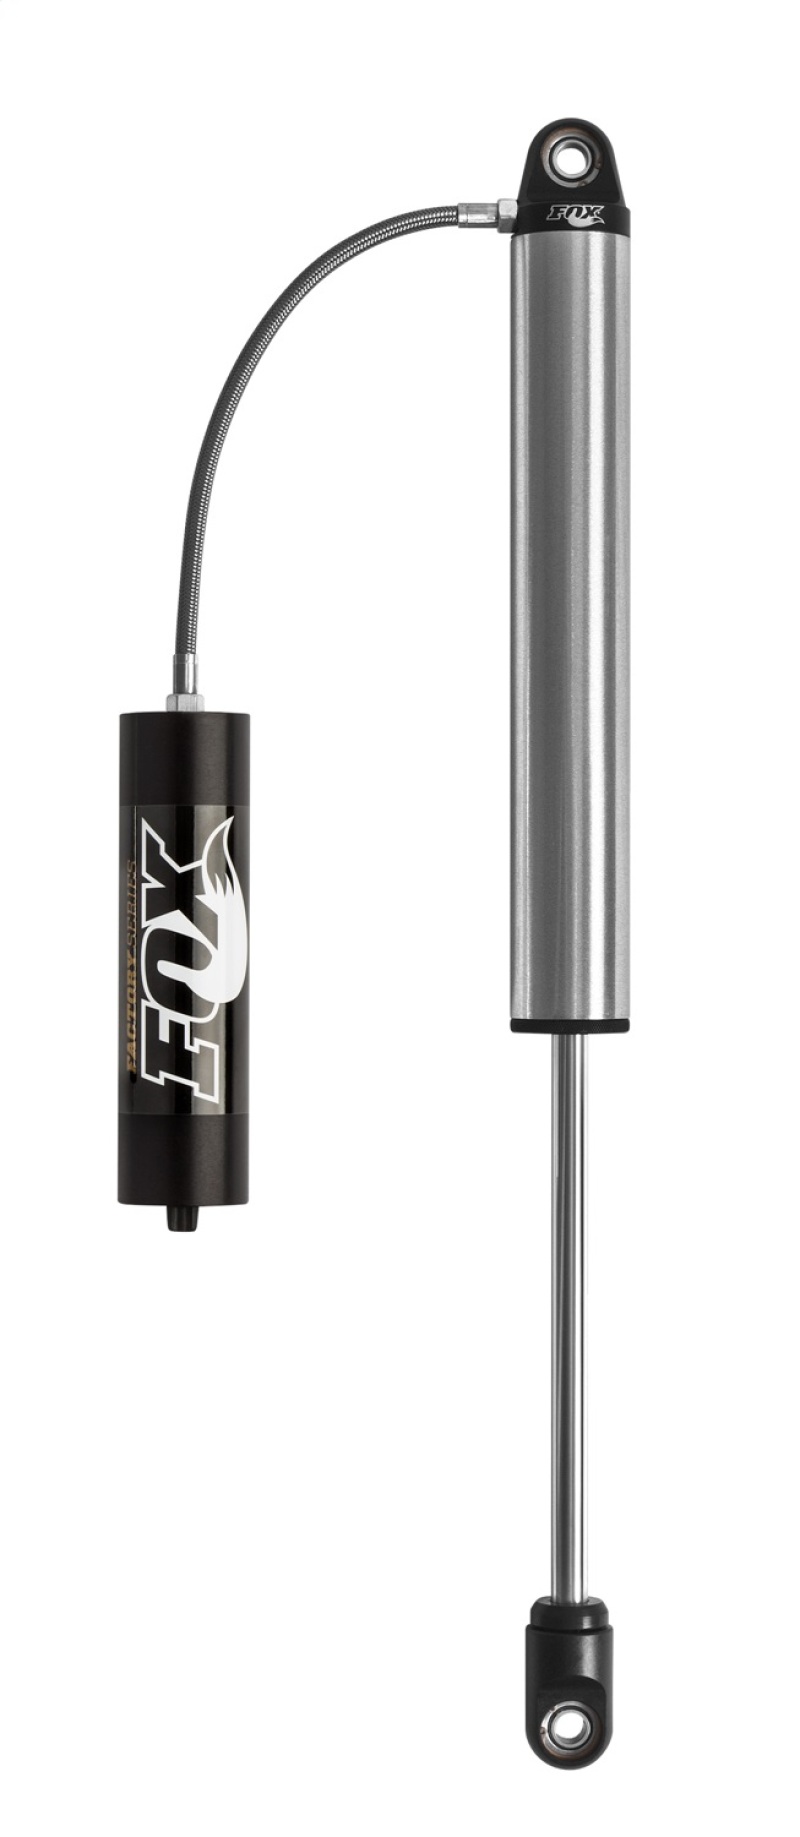 Fox 2.0 Factory Series 6.5in. Smooth Body Remote Reservoir Shock 5/8in. Shaft (30/90 Valving) - Blk - 980-02-030